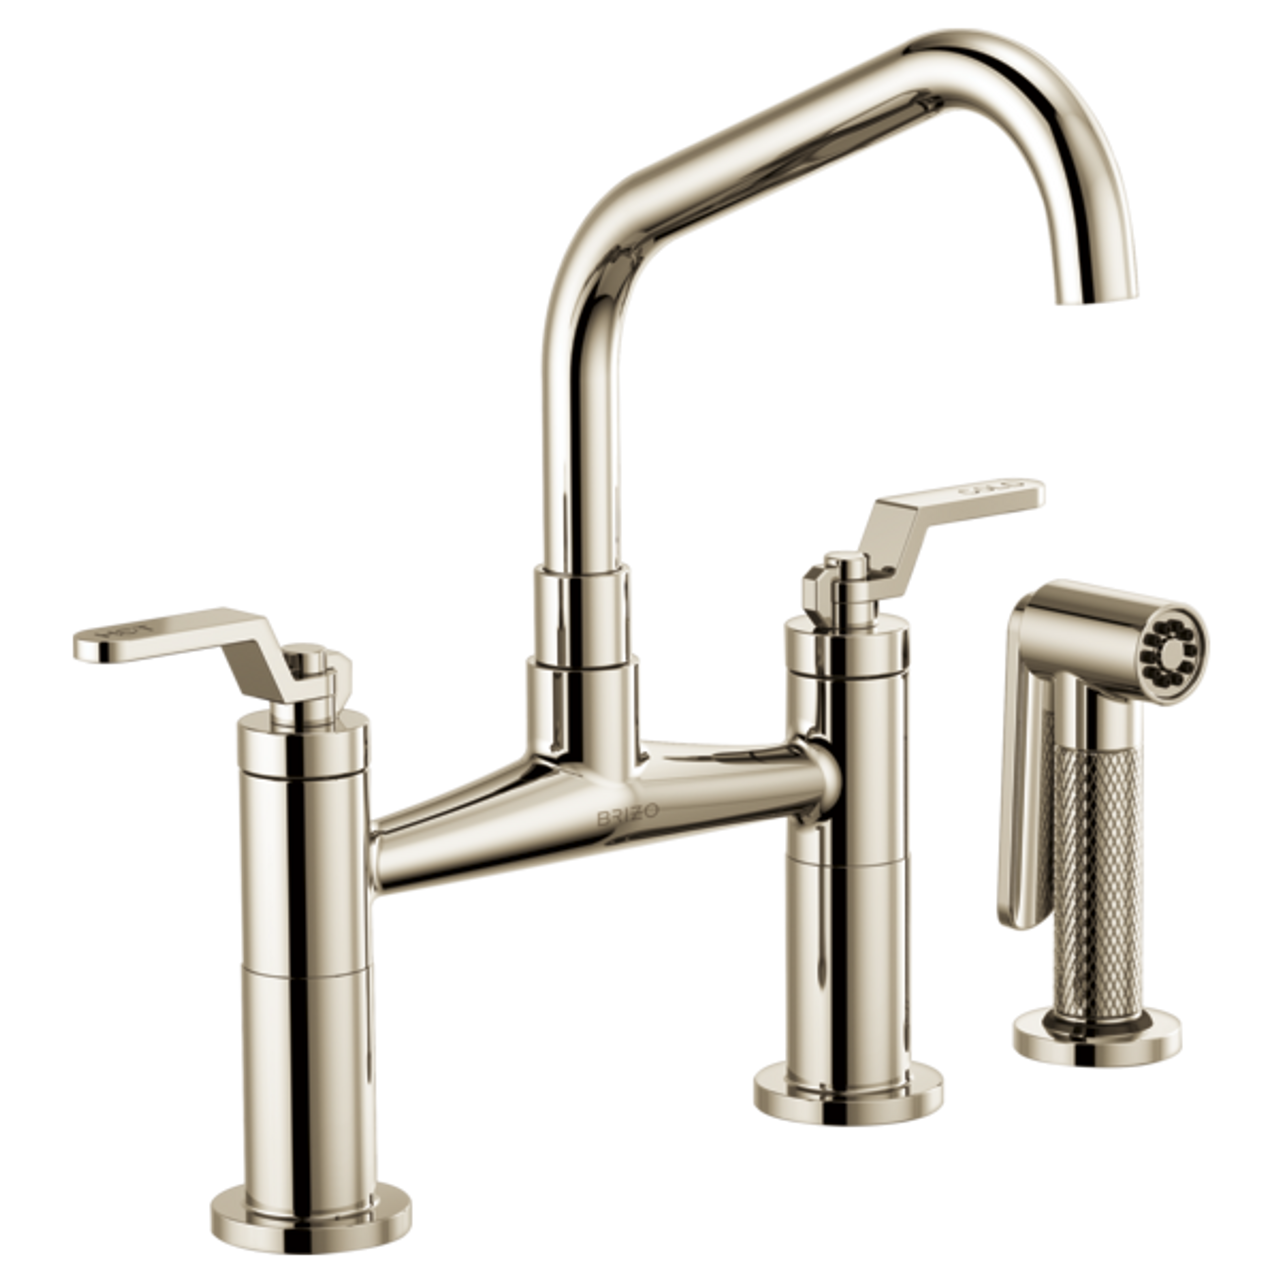 Brizo Litze Bridge Faucet With Angled Spout And Industrial Handle